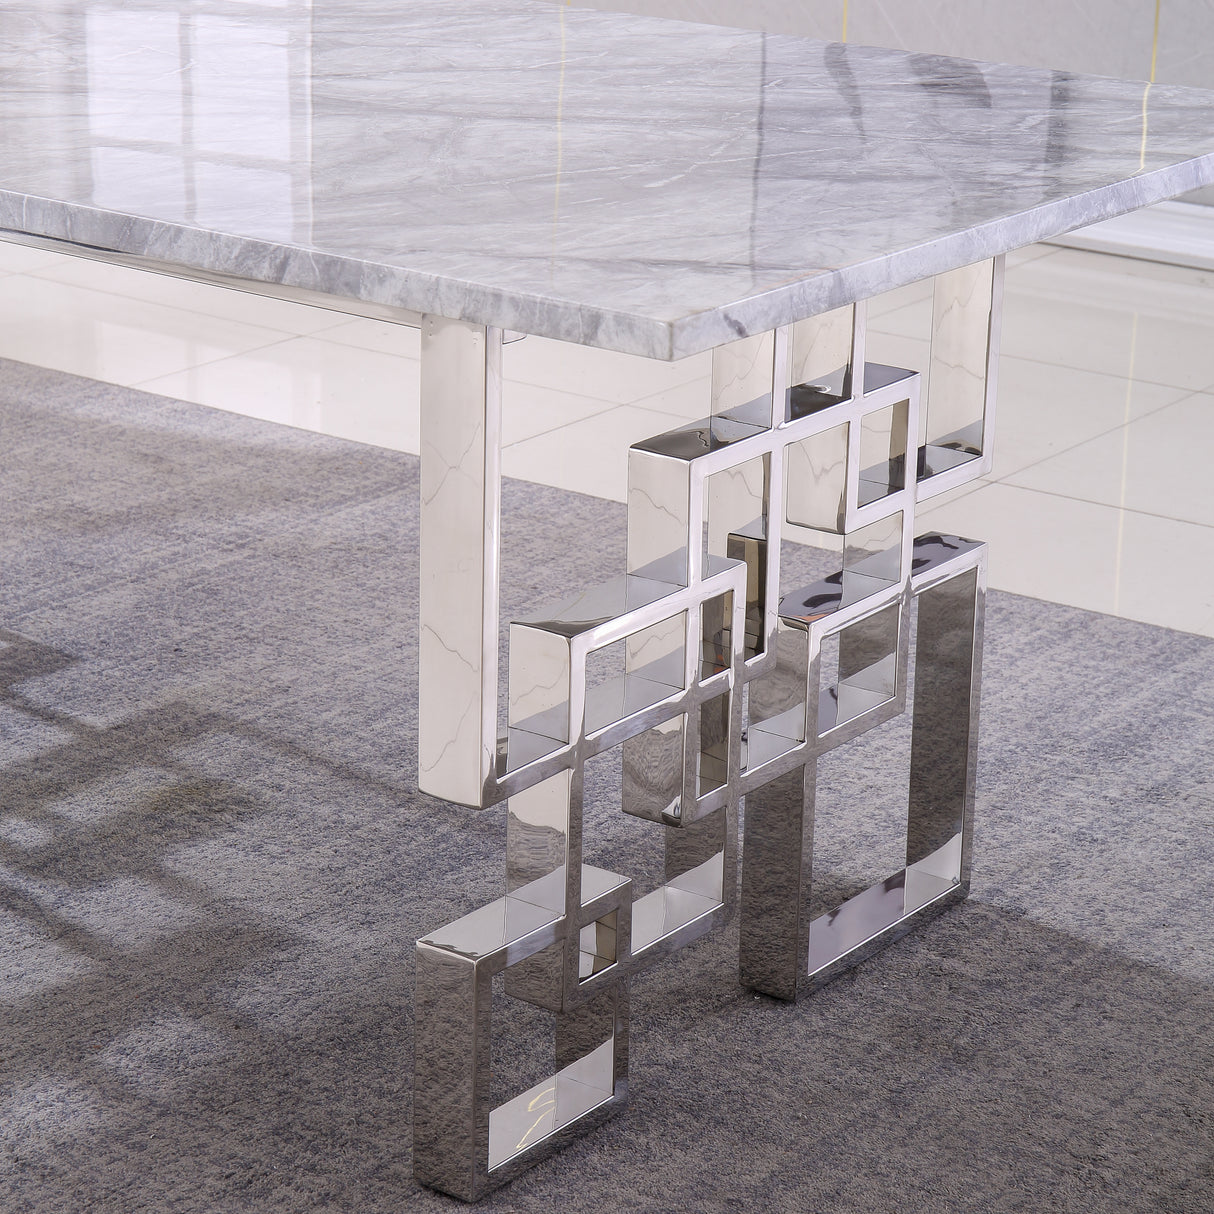 Contemporary Rectangular Marble Table, 0.71" Marble Top, Silver Mirrored Finish, Luxury Design For Home (78.7"x39.4"x29.9") - Home Elegance USA